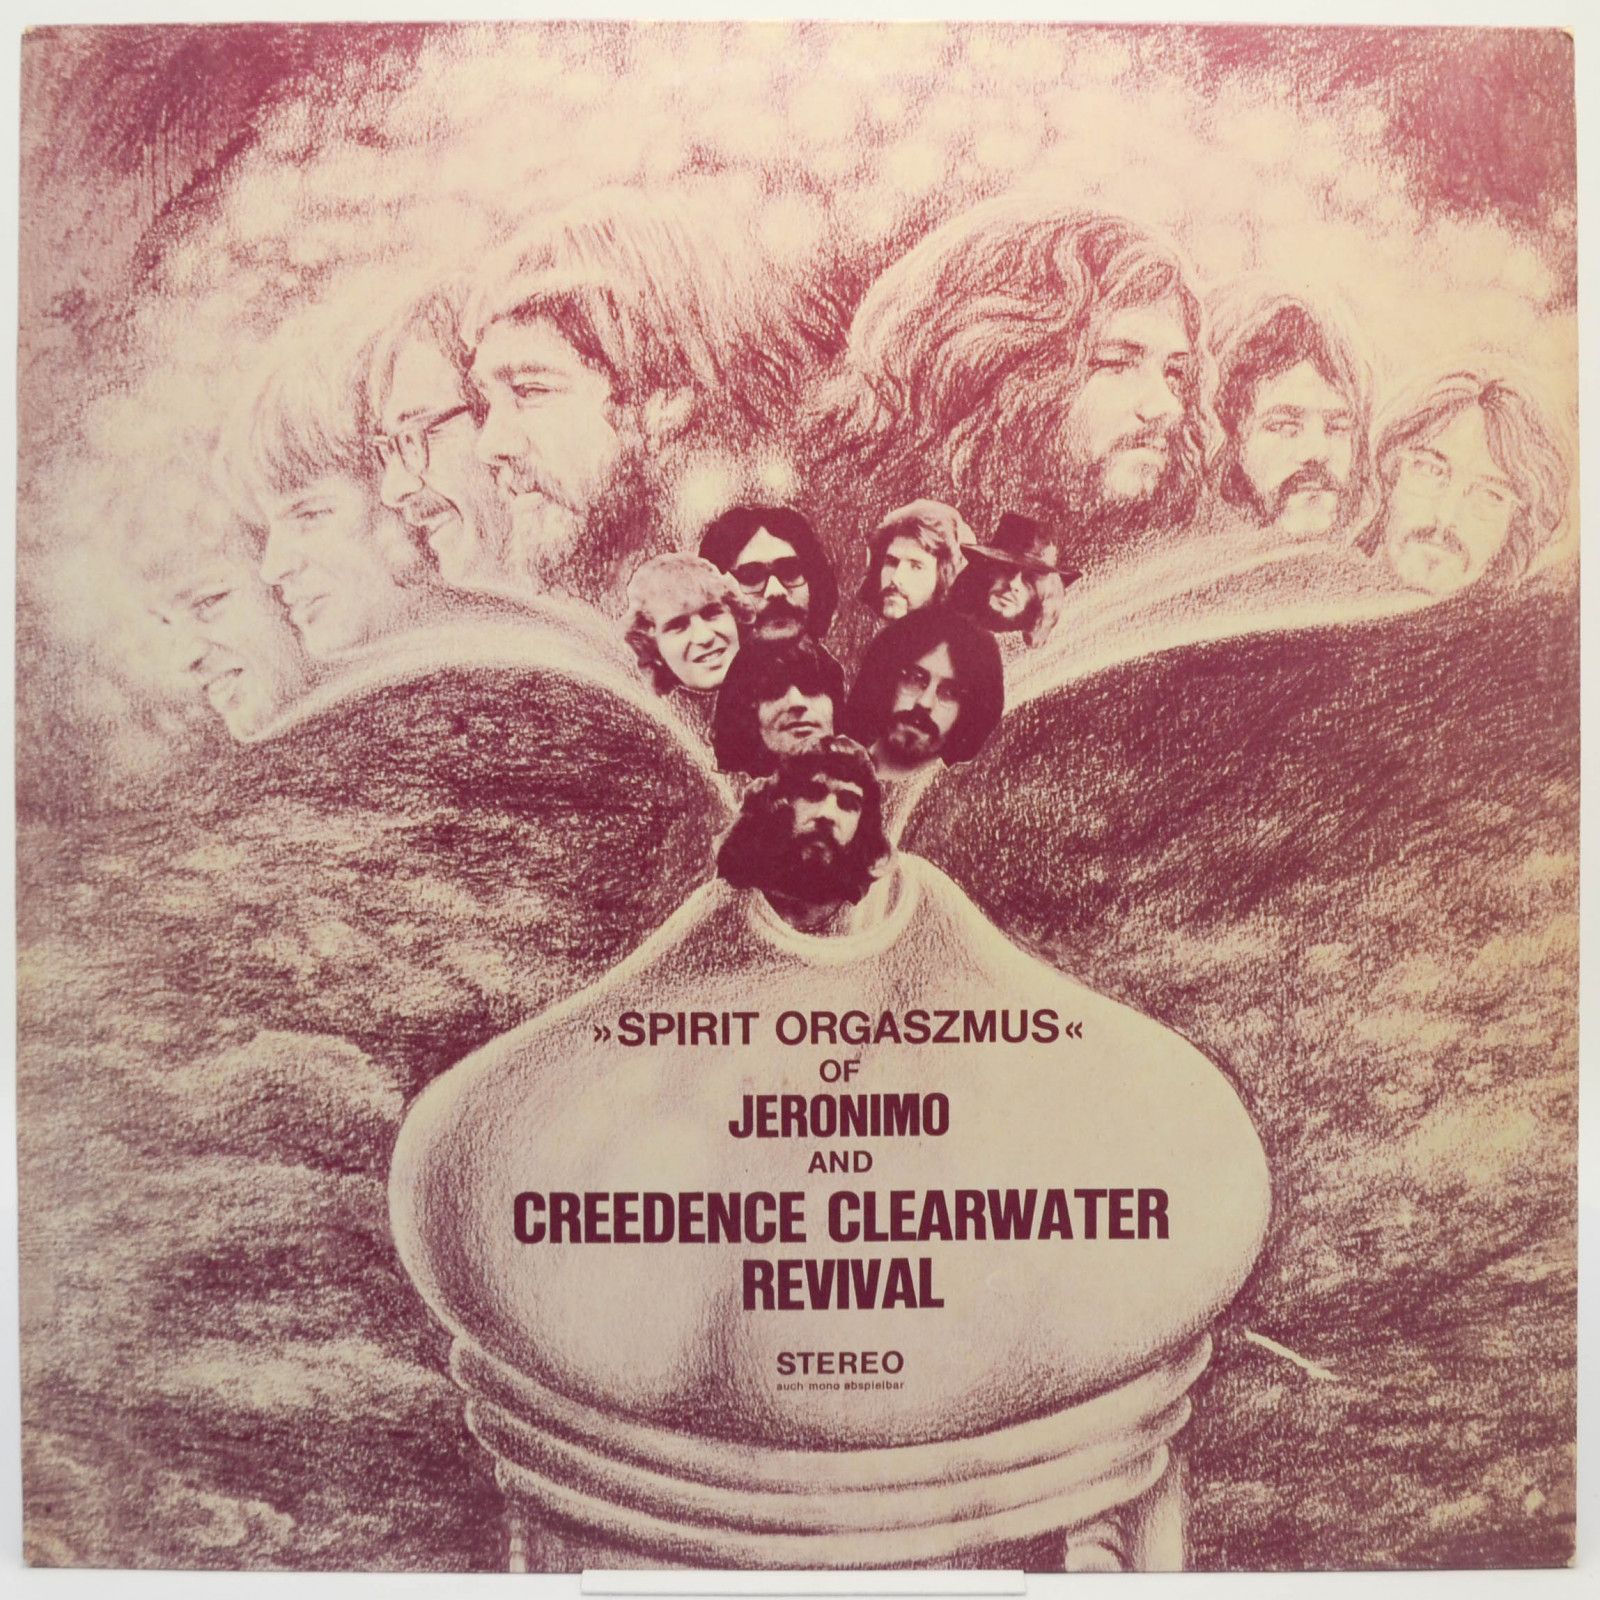 Jeronimo And Creedence Clearwater Revival — Spirit Orgaszmus, 1970